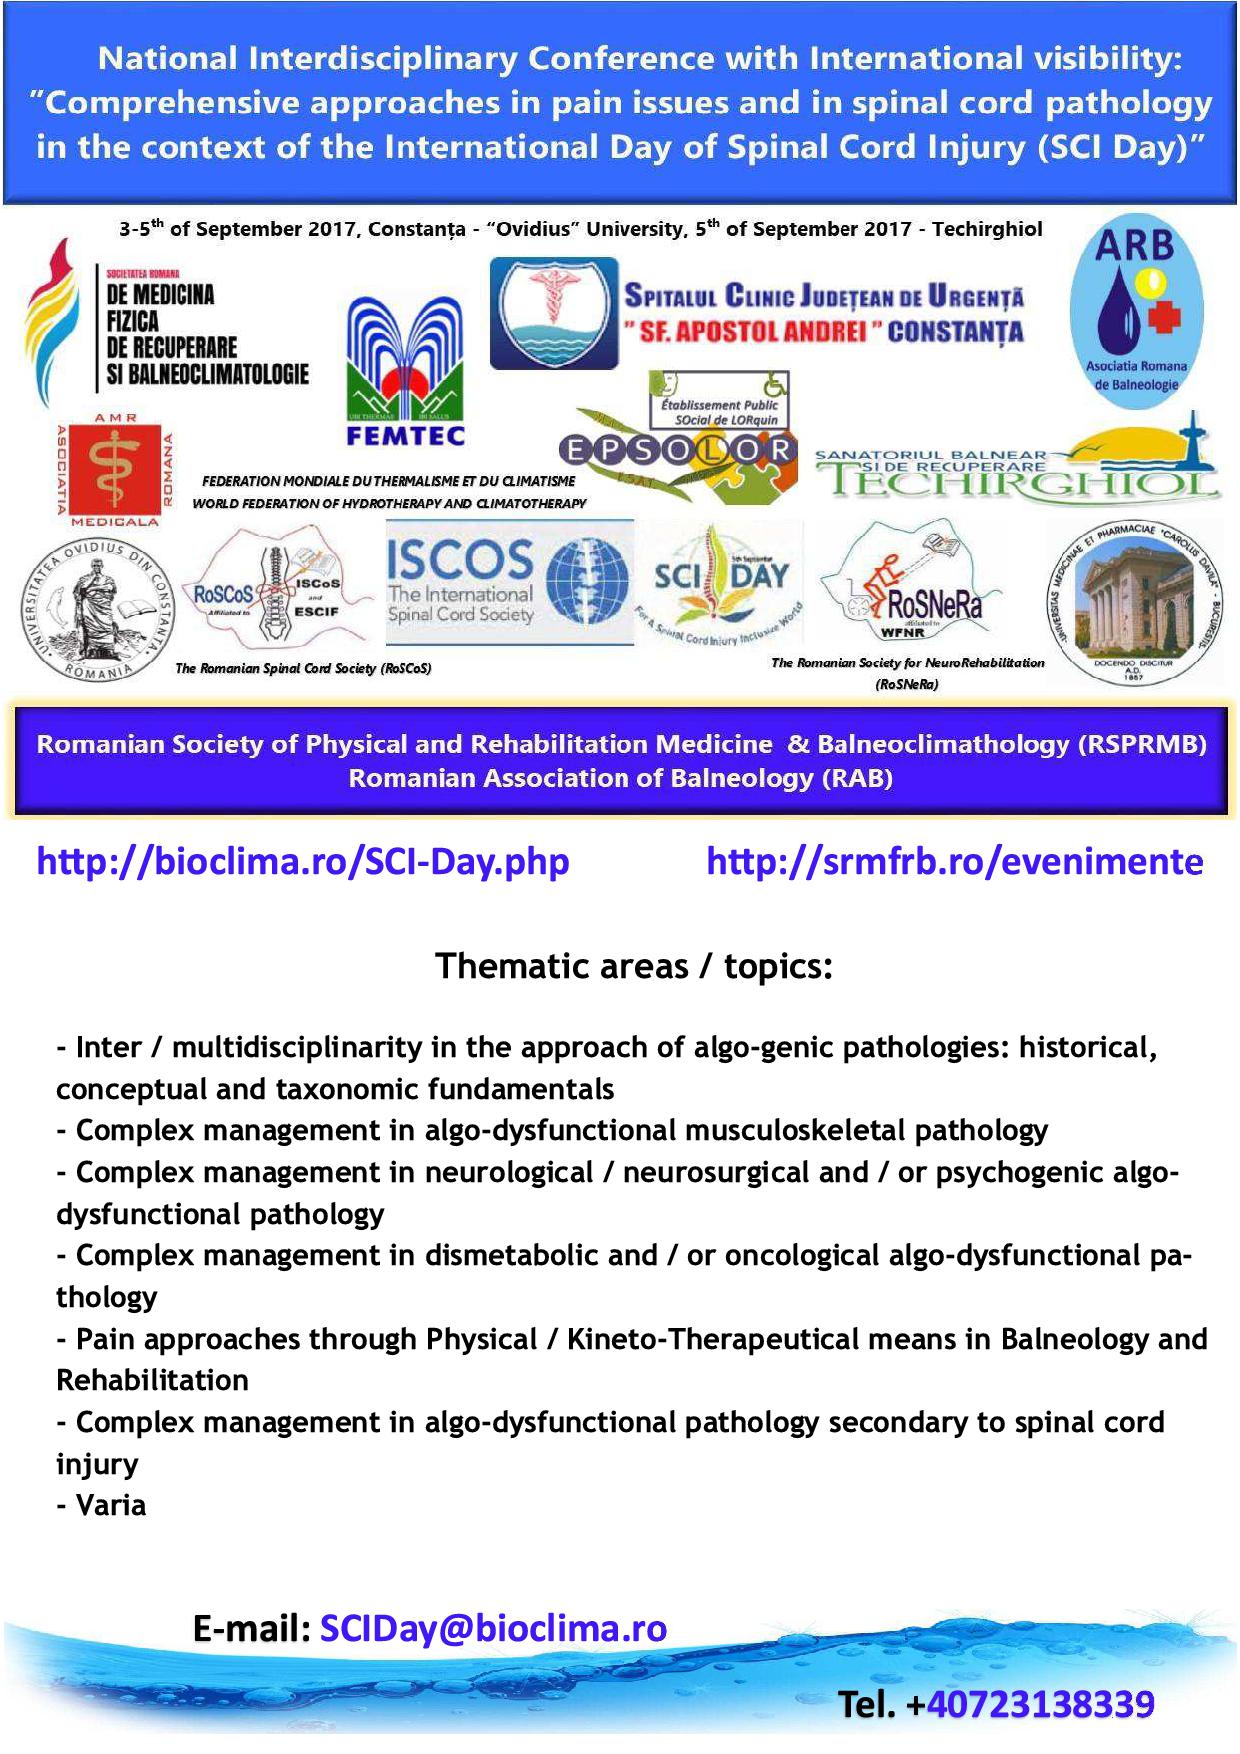 National Interdisciplinary Conference with International Visibility: 'Comprehensive approaches in pain issues and in spinal cord pathology in the context of the International Day of Spinal Cord Injury (SCI Day)'